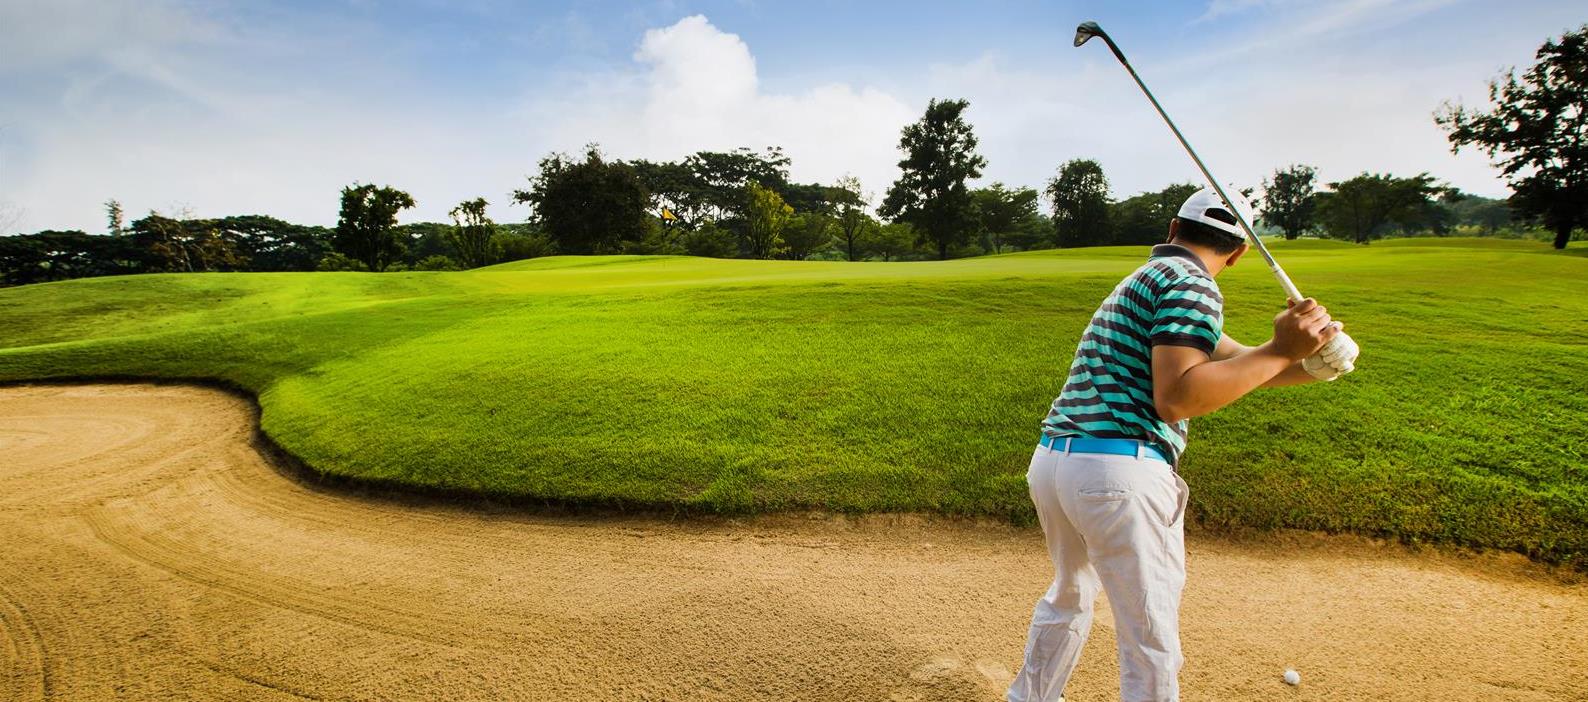 golfers-are-hit-ball-sand-courts